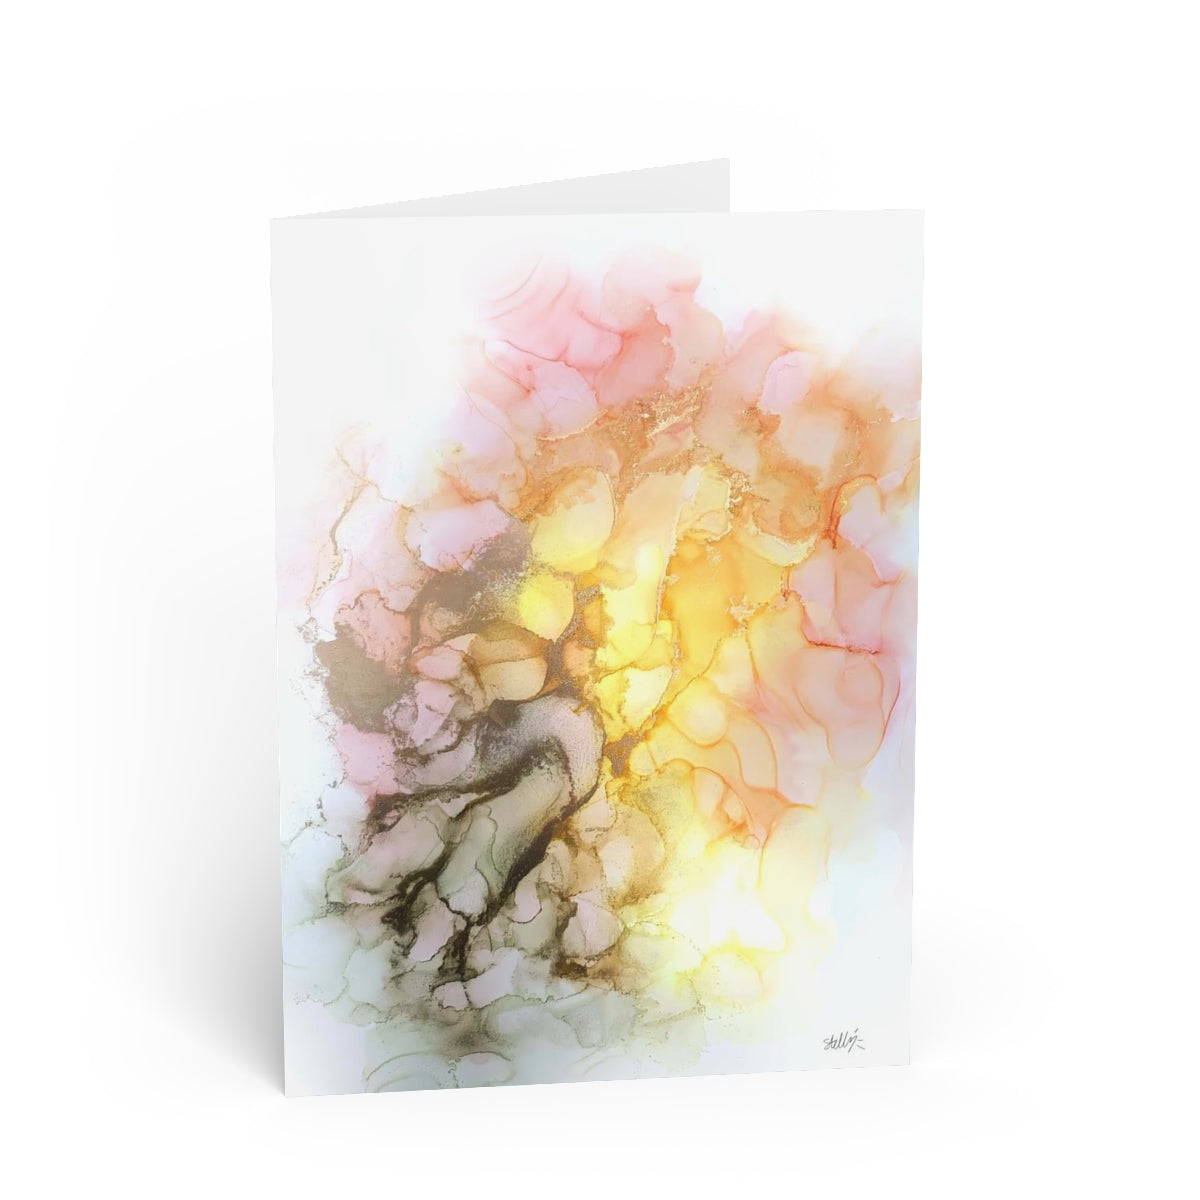 "Sun through the Clouds" Folded Greeting Card